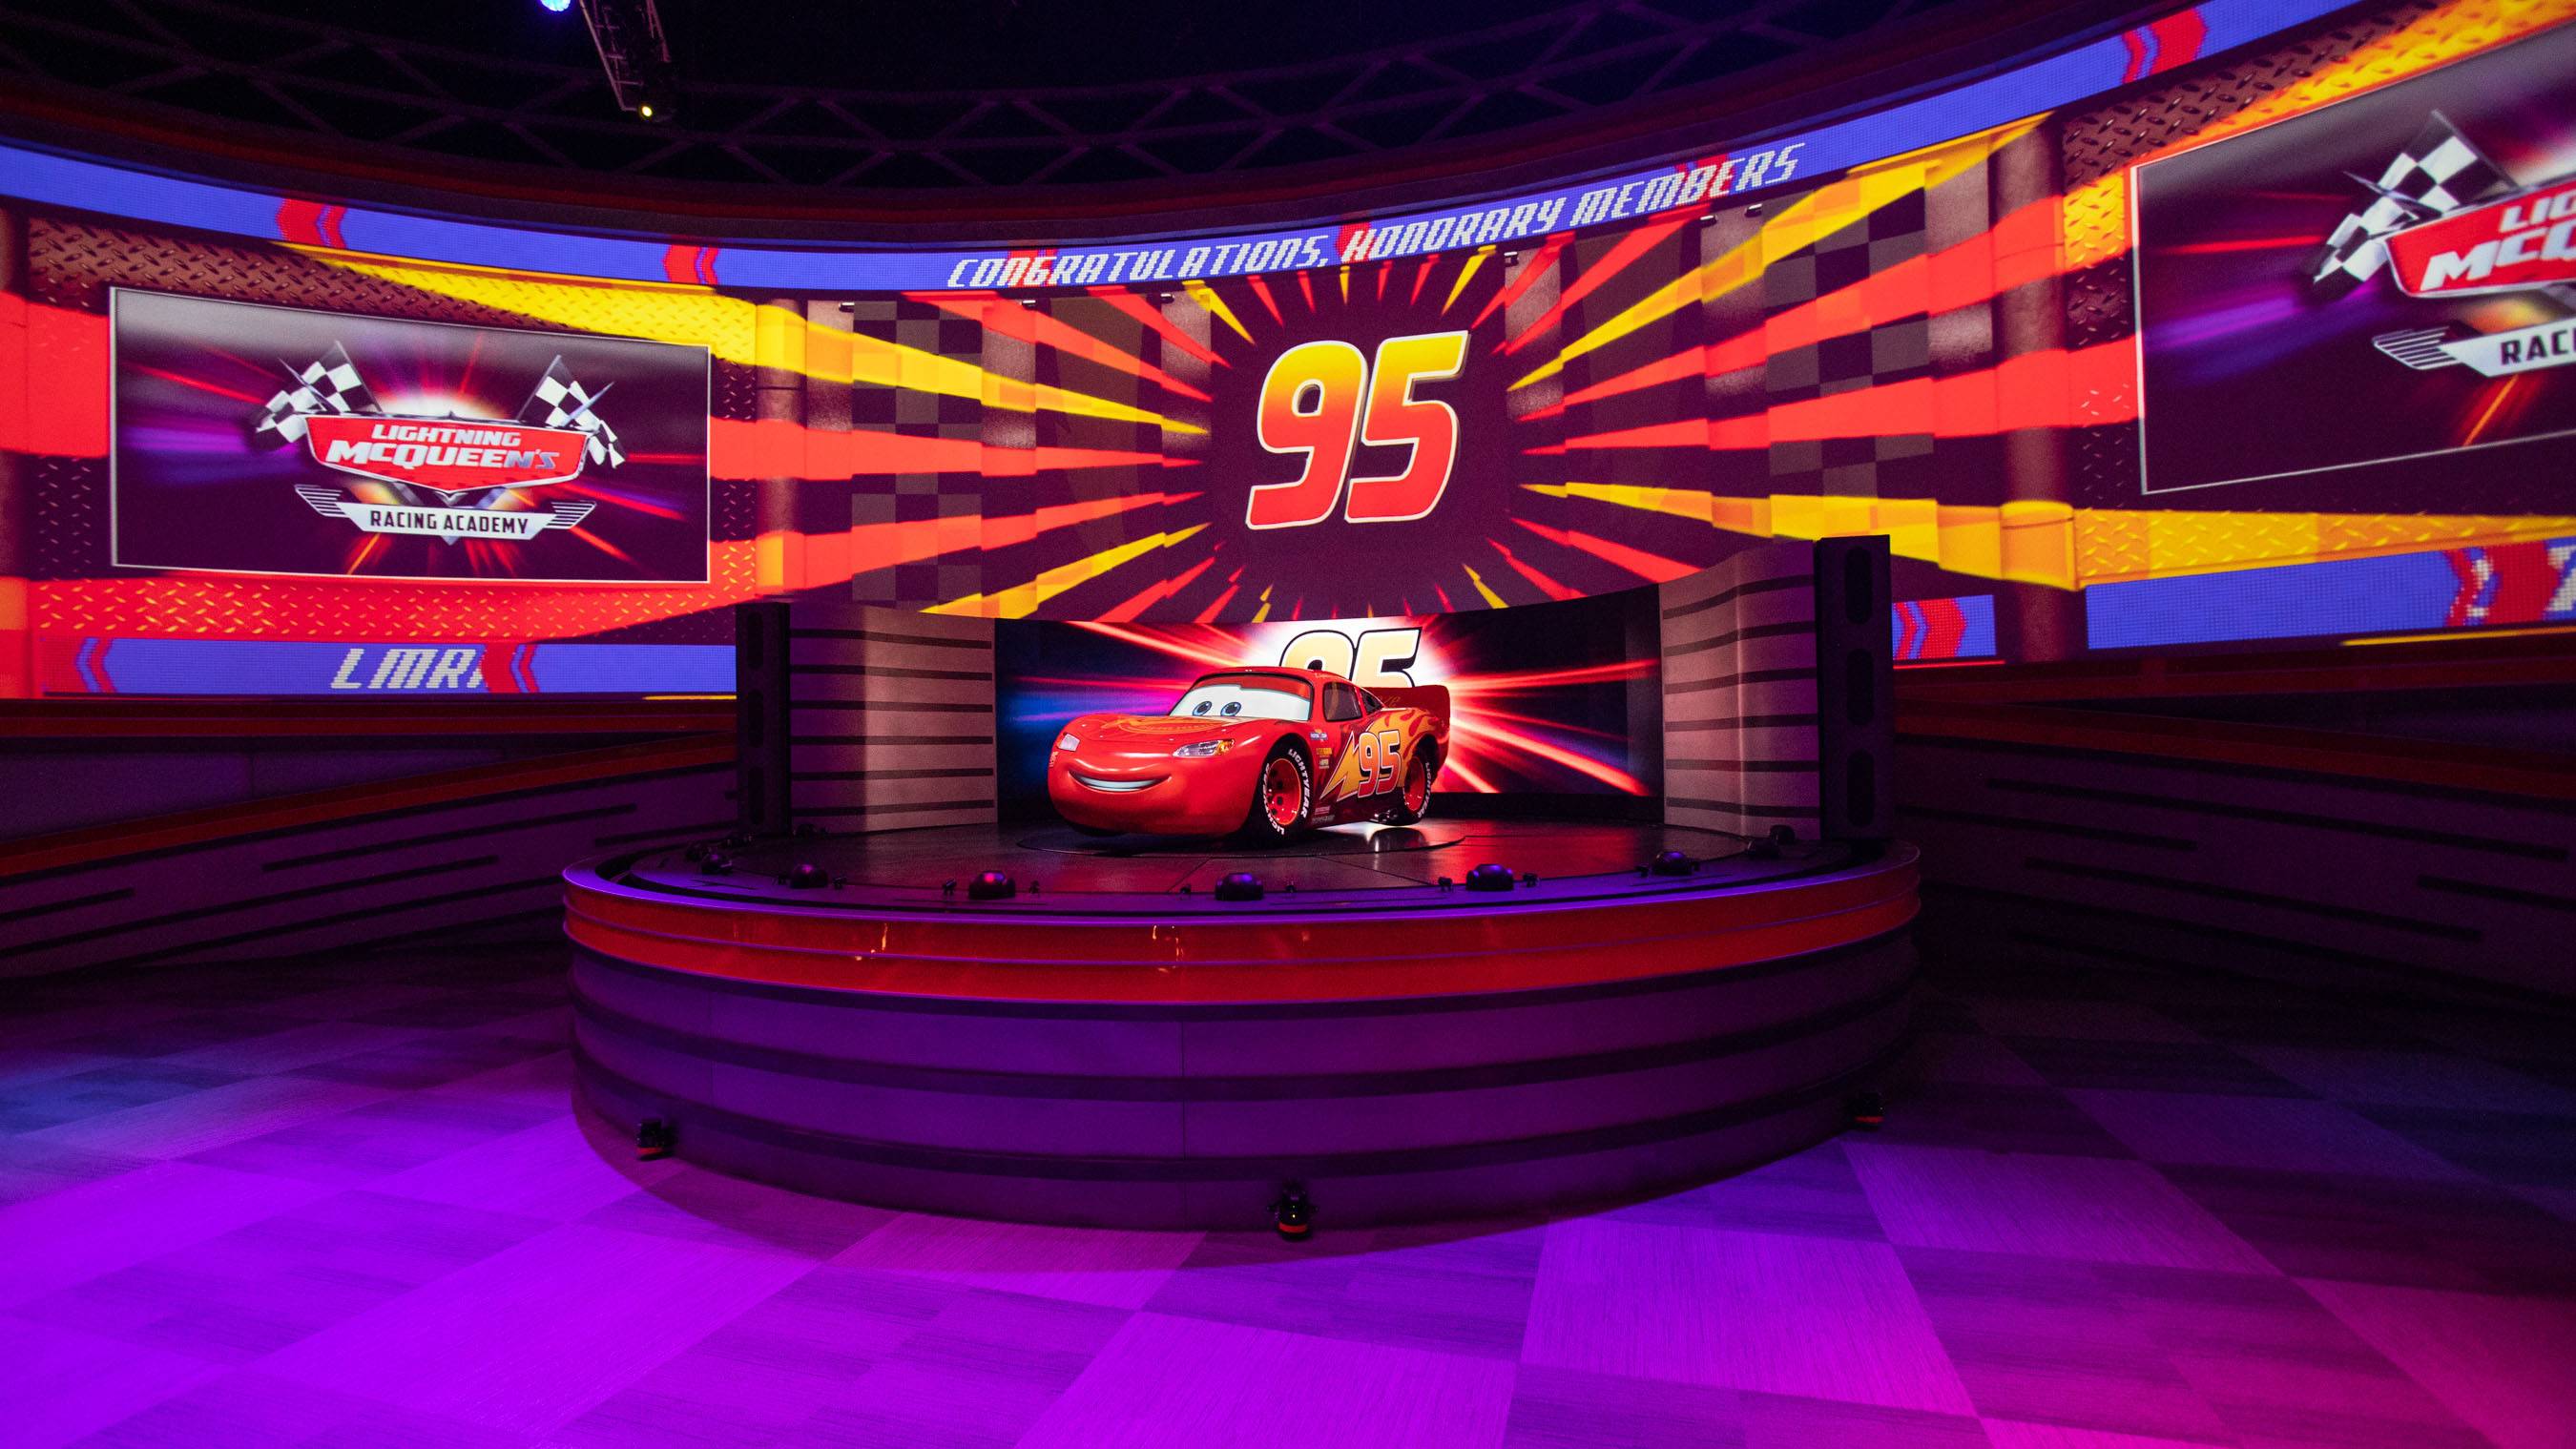 'Disney Parks Presents a 25 Days of Christmas Holiday Party' TV special gives a preview of the upcoming Lightning McQueen’s Racing Academy